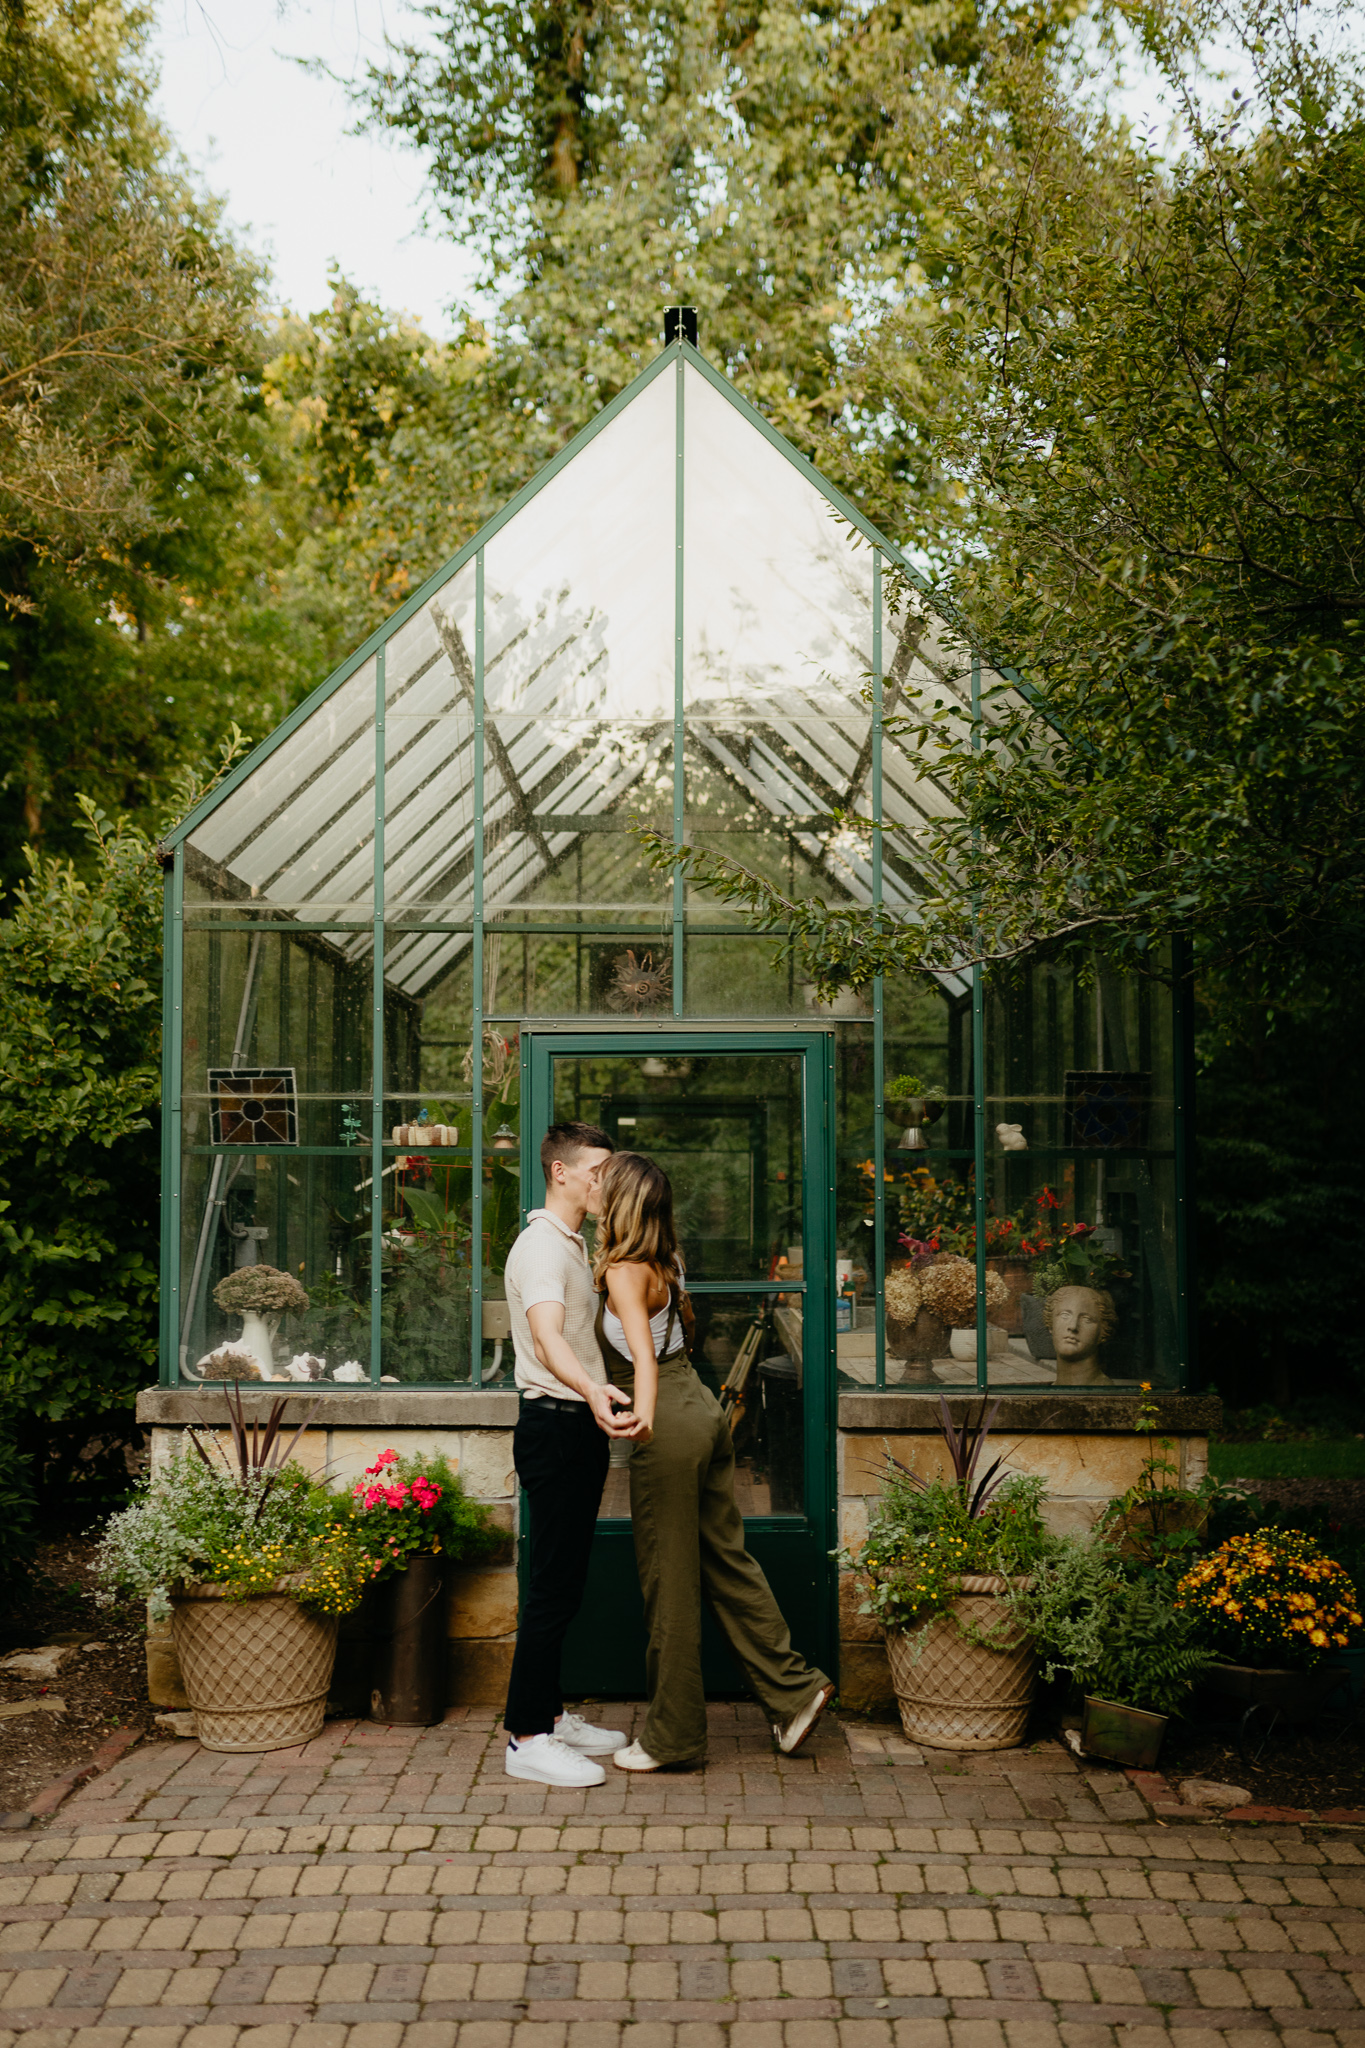 Defries Gardens Indiana couple photos || Wes Anderson Inspired Greenhouse Photos